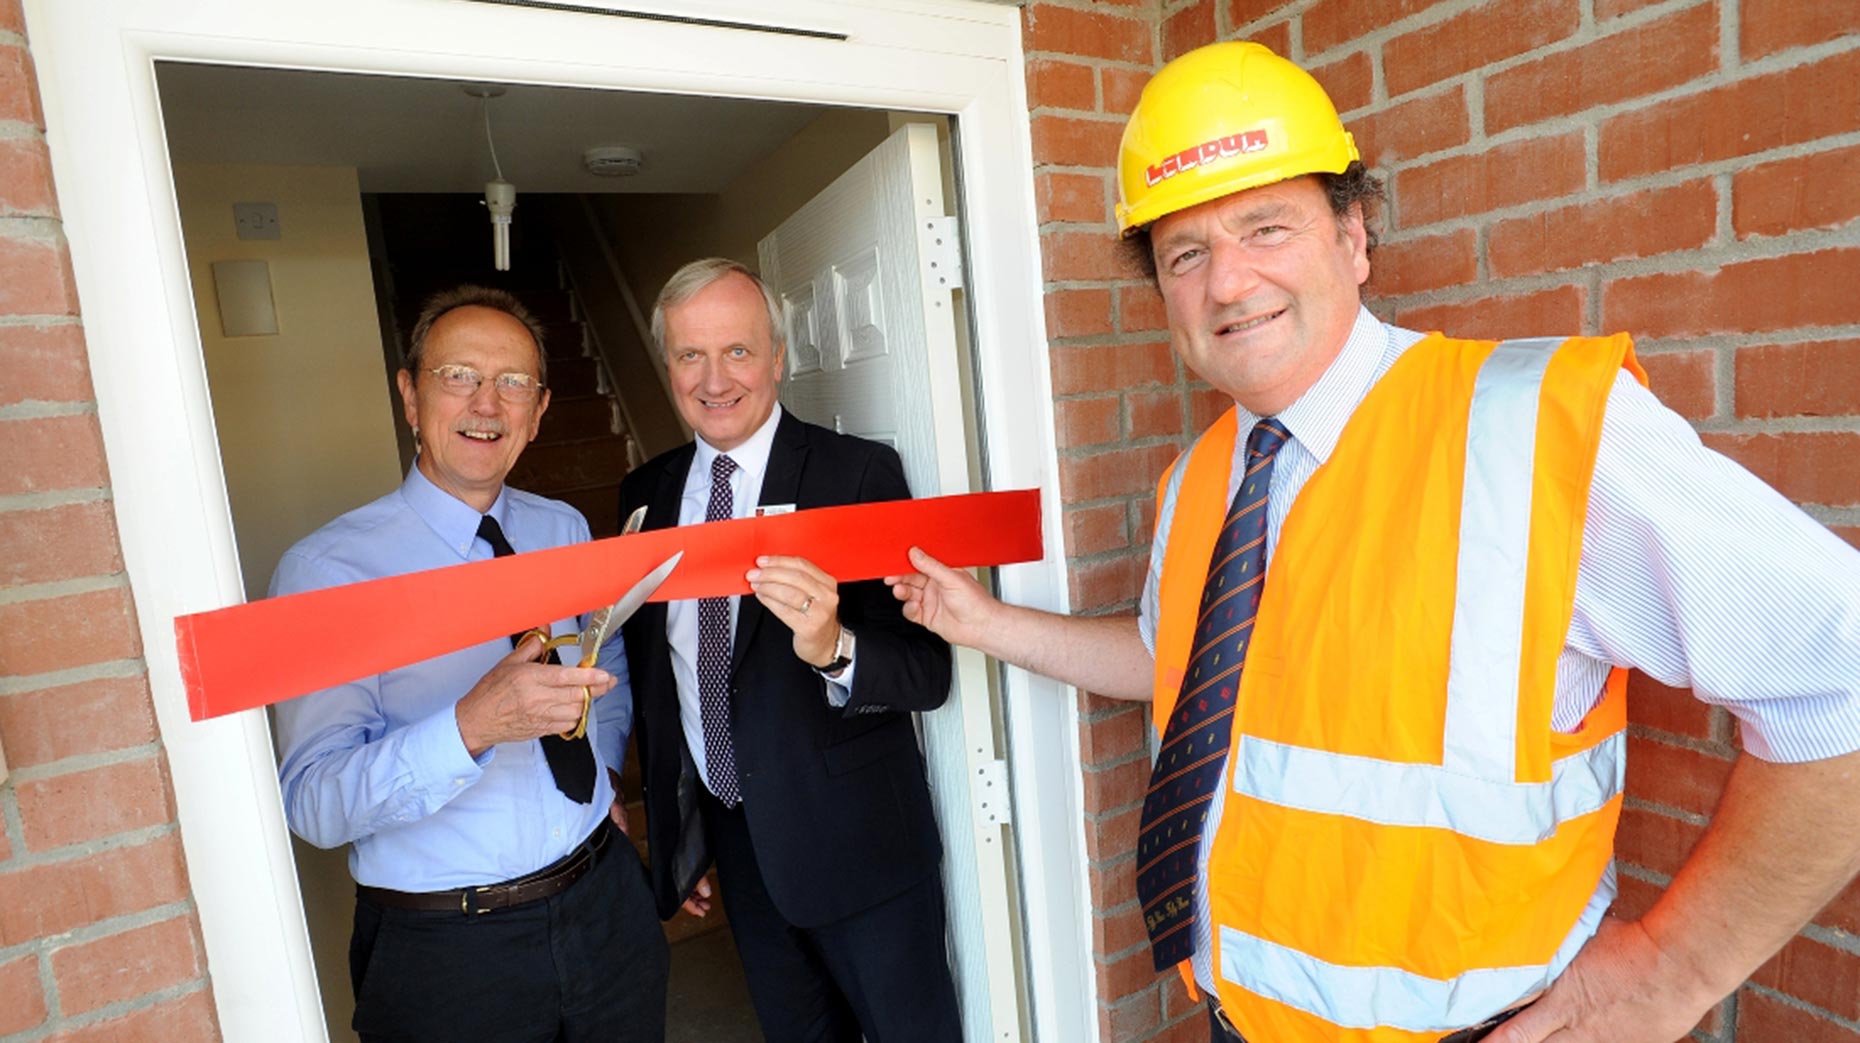 Council Leader Ric Metcalfe, Chief Executive Andrew Taylor, Director of Housing and Community Services John Bibby and Chairman of Lindum Group, David Chambers, celebrate the completion of five new council homes in Stapleford Avenue. Photo: Stuart Wilde